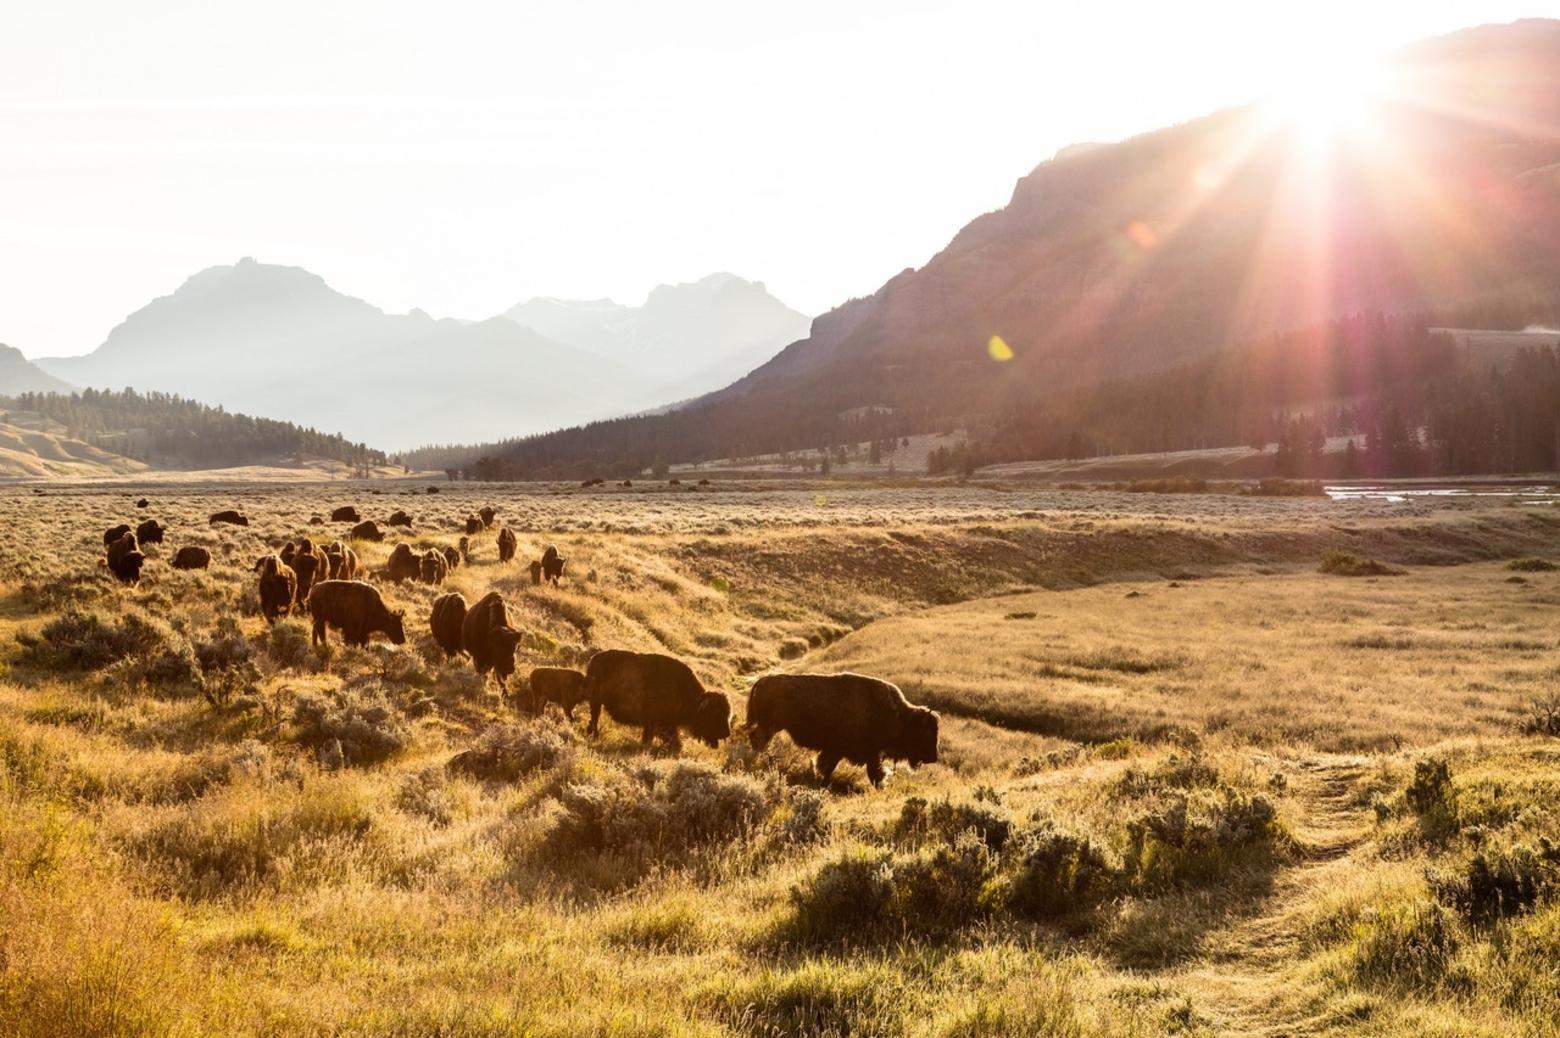 Bison group on the move at sunrise in Lamar Valley.  NPS / Jacob W. Frank